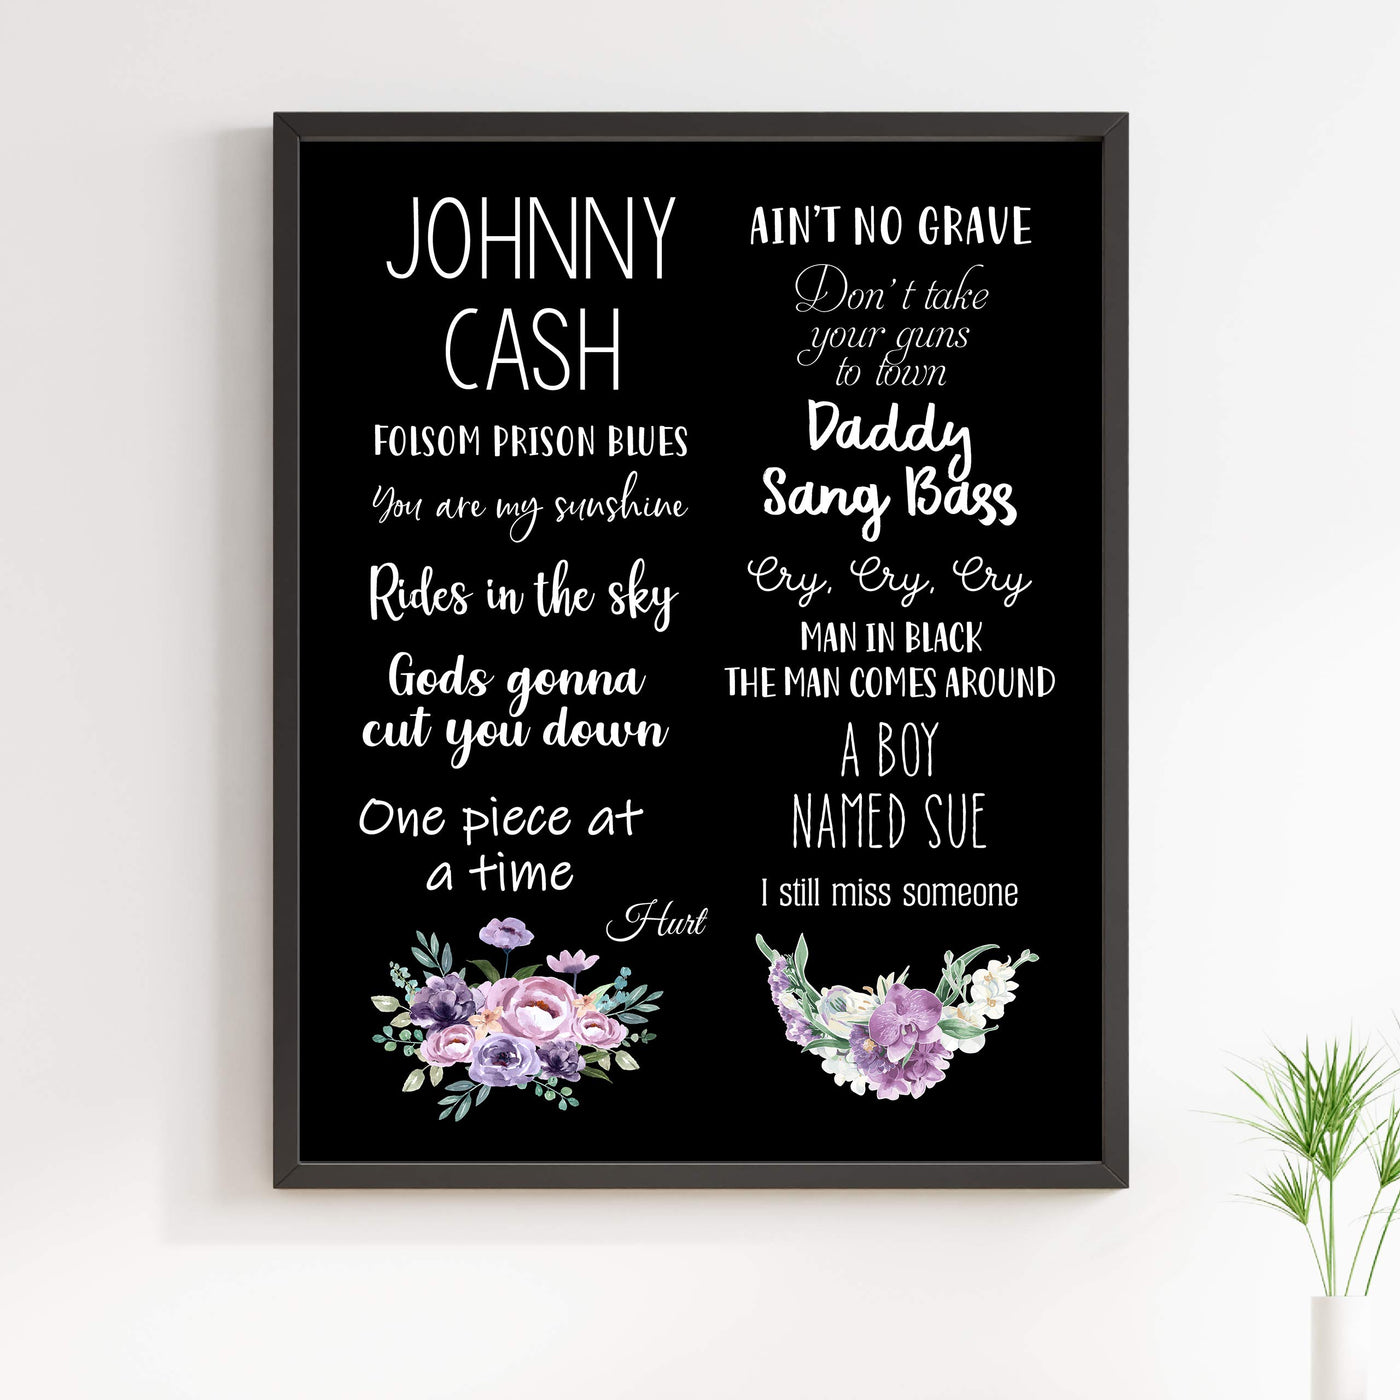 Johnny Cash-Greatest Hits Wall Art Sign -11 x 14" Song Titles Floral Poster Print -Ready to Frame. Rustic Decor for Home-Studio-Bar-Dorm-Cave. Great Gift for All Country Music Fans!